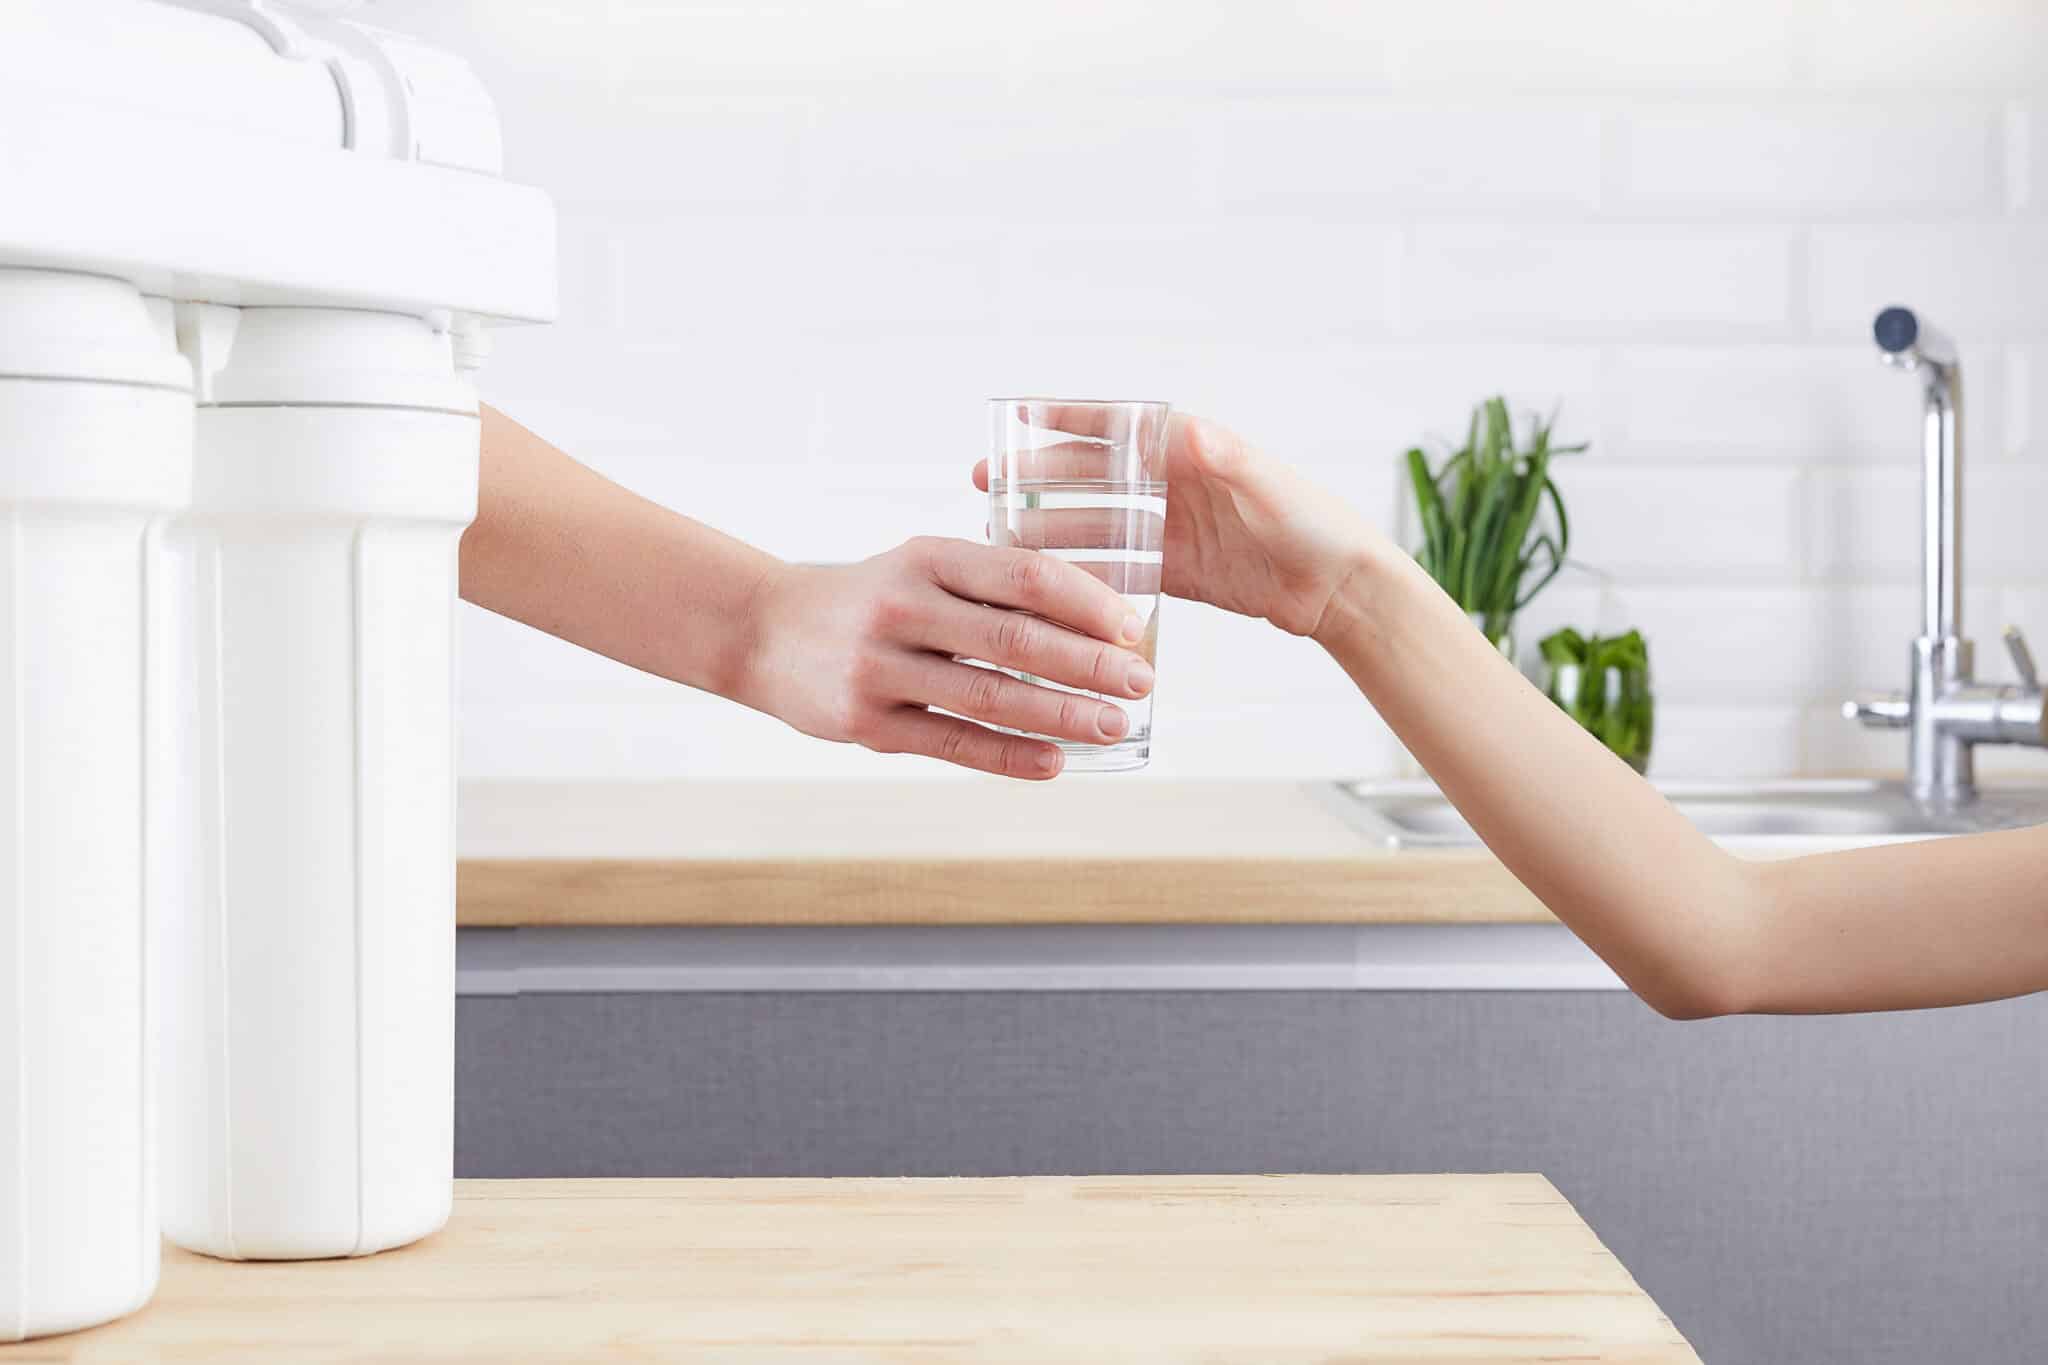 A water filtration system beside a female hand offering a glass of clean water, symbolizing purified water and a healthy life concept.